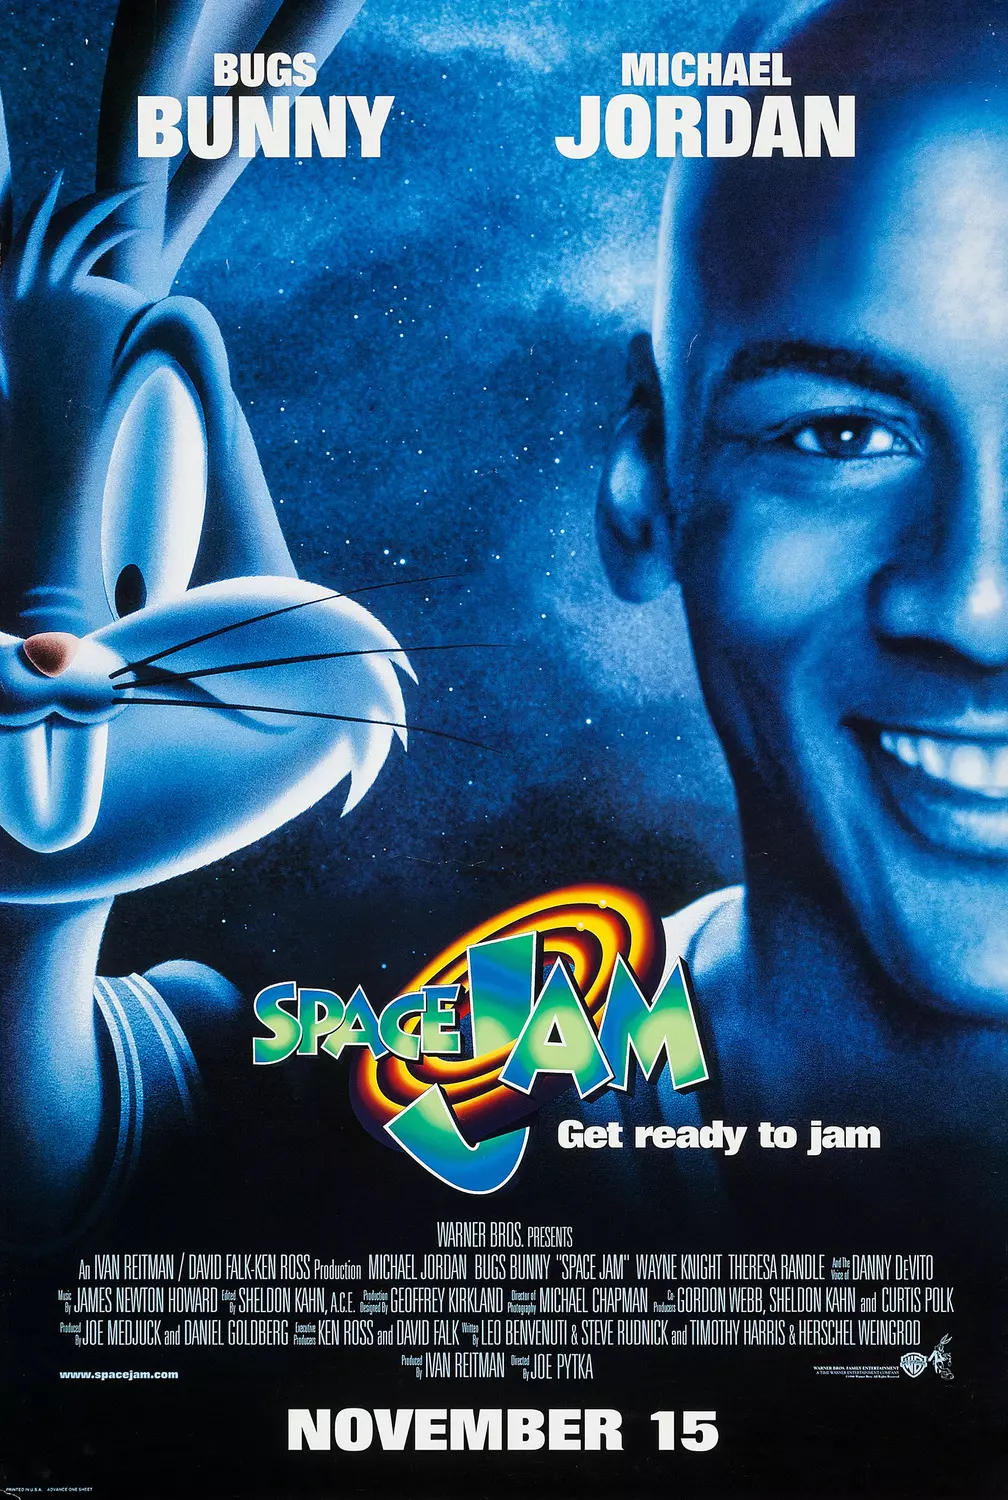 LeBron James Reveals Official Title and Logo For 'Space Jam 2'